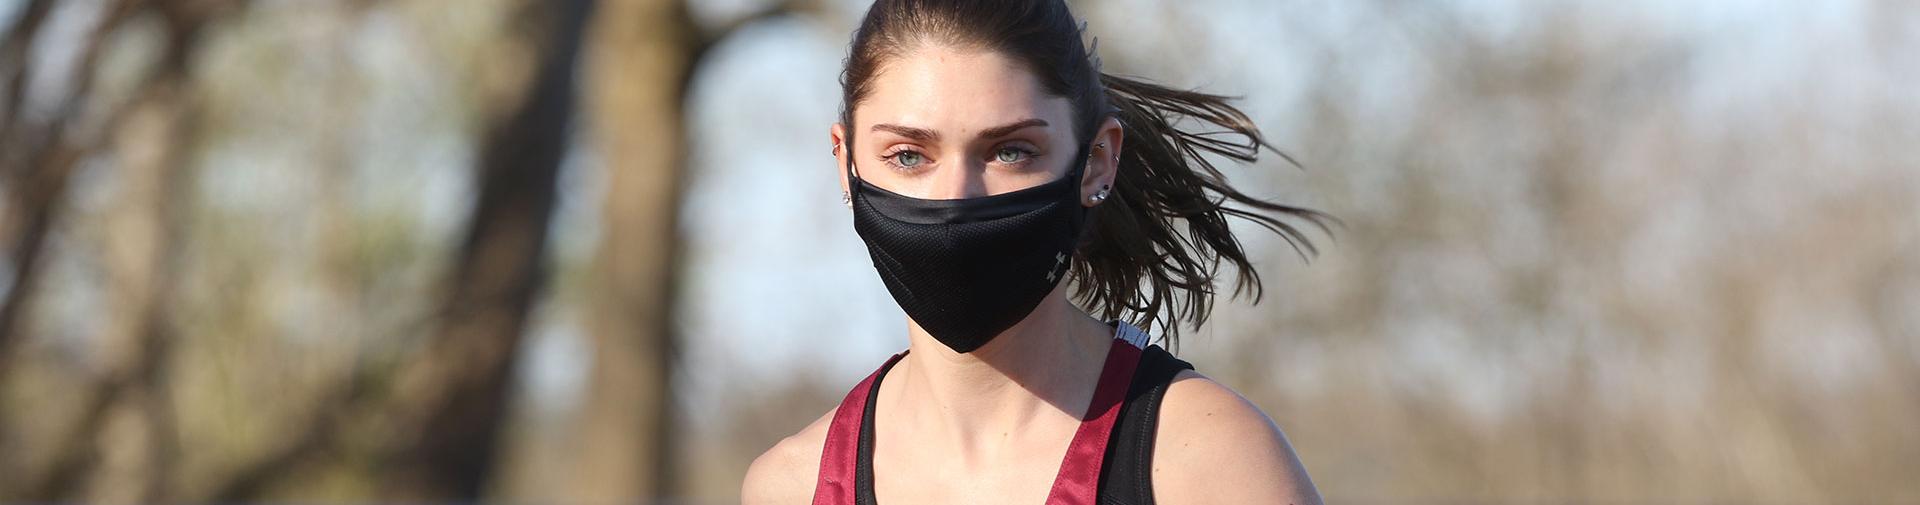 Female student jogging with a black mask on.